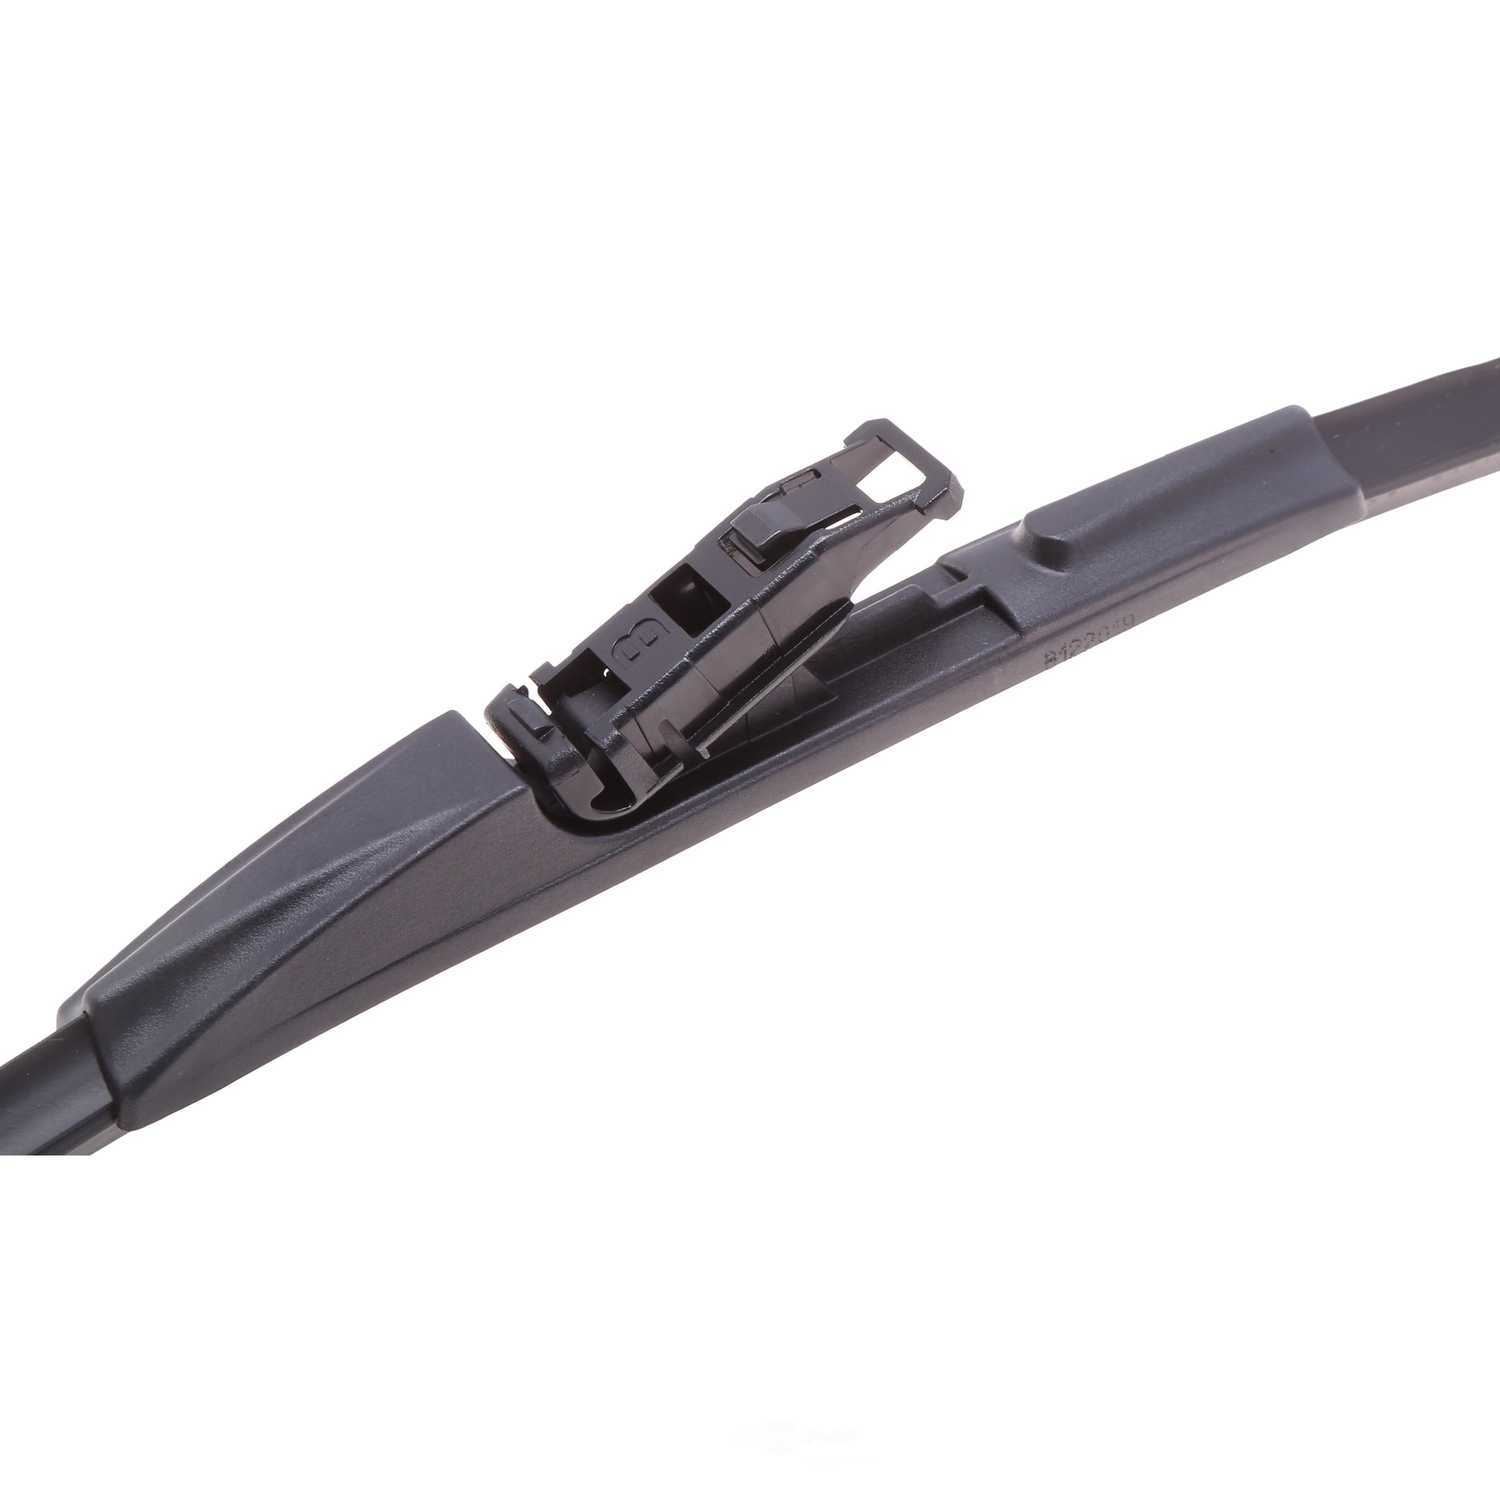 ACDELCO GOLD/PROFESSIONAL - Beam Wiper Blade - DCC 8-992415